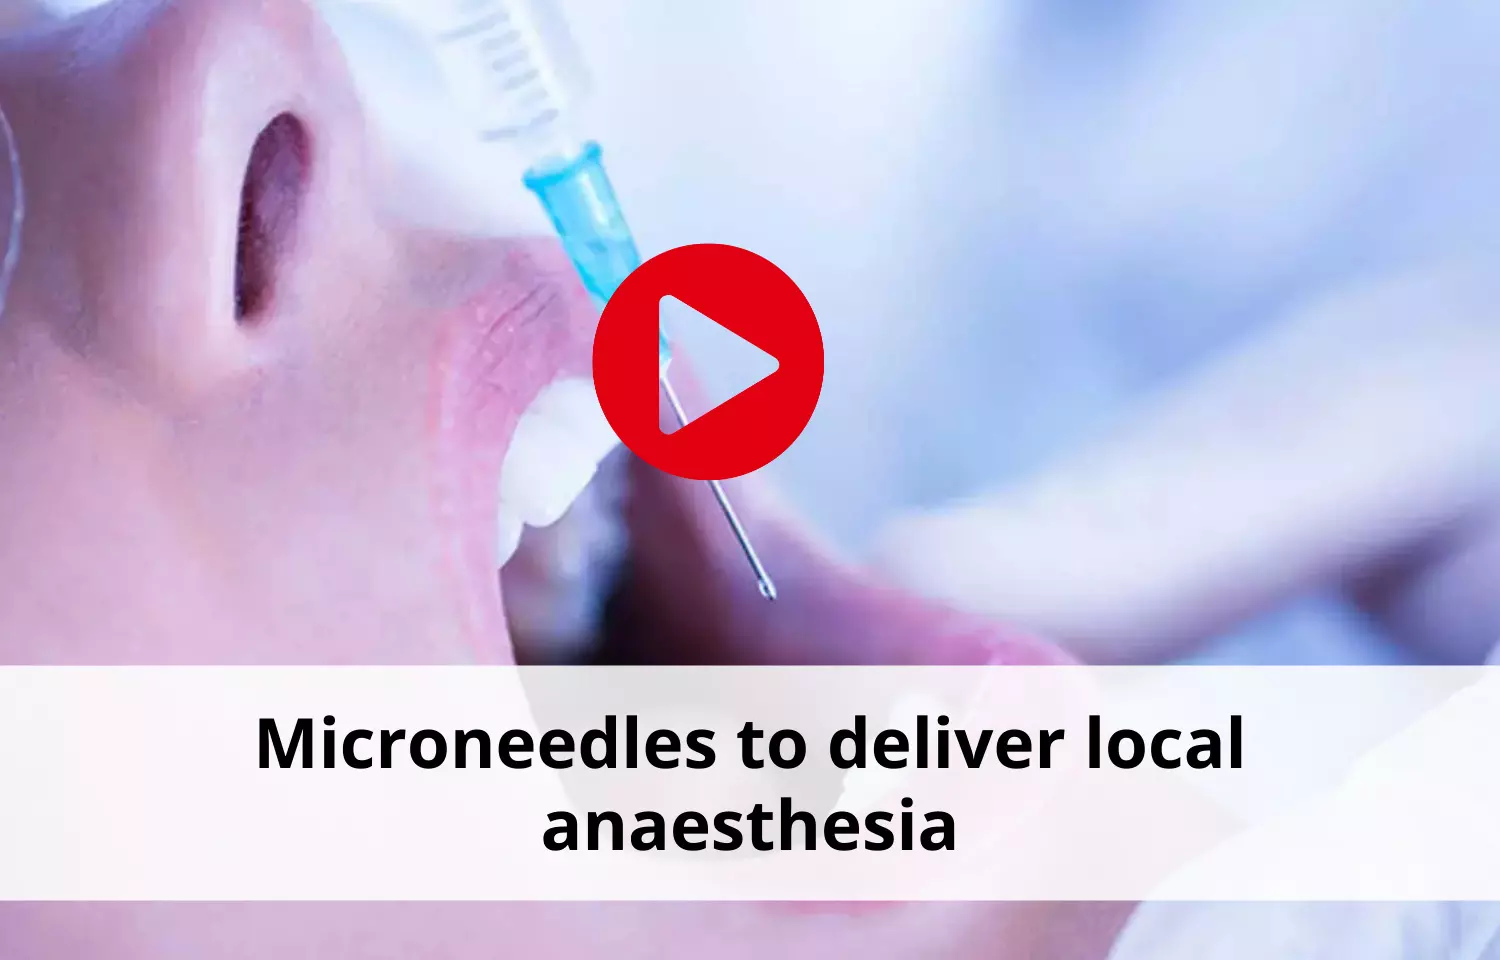 Microneedles to deliver local anaesthesia